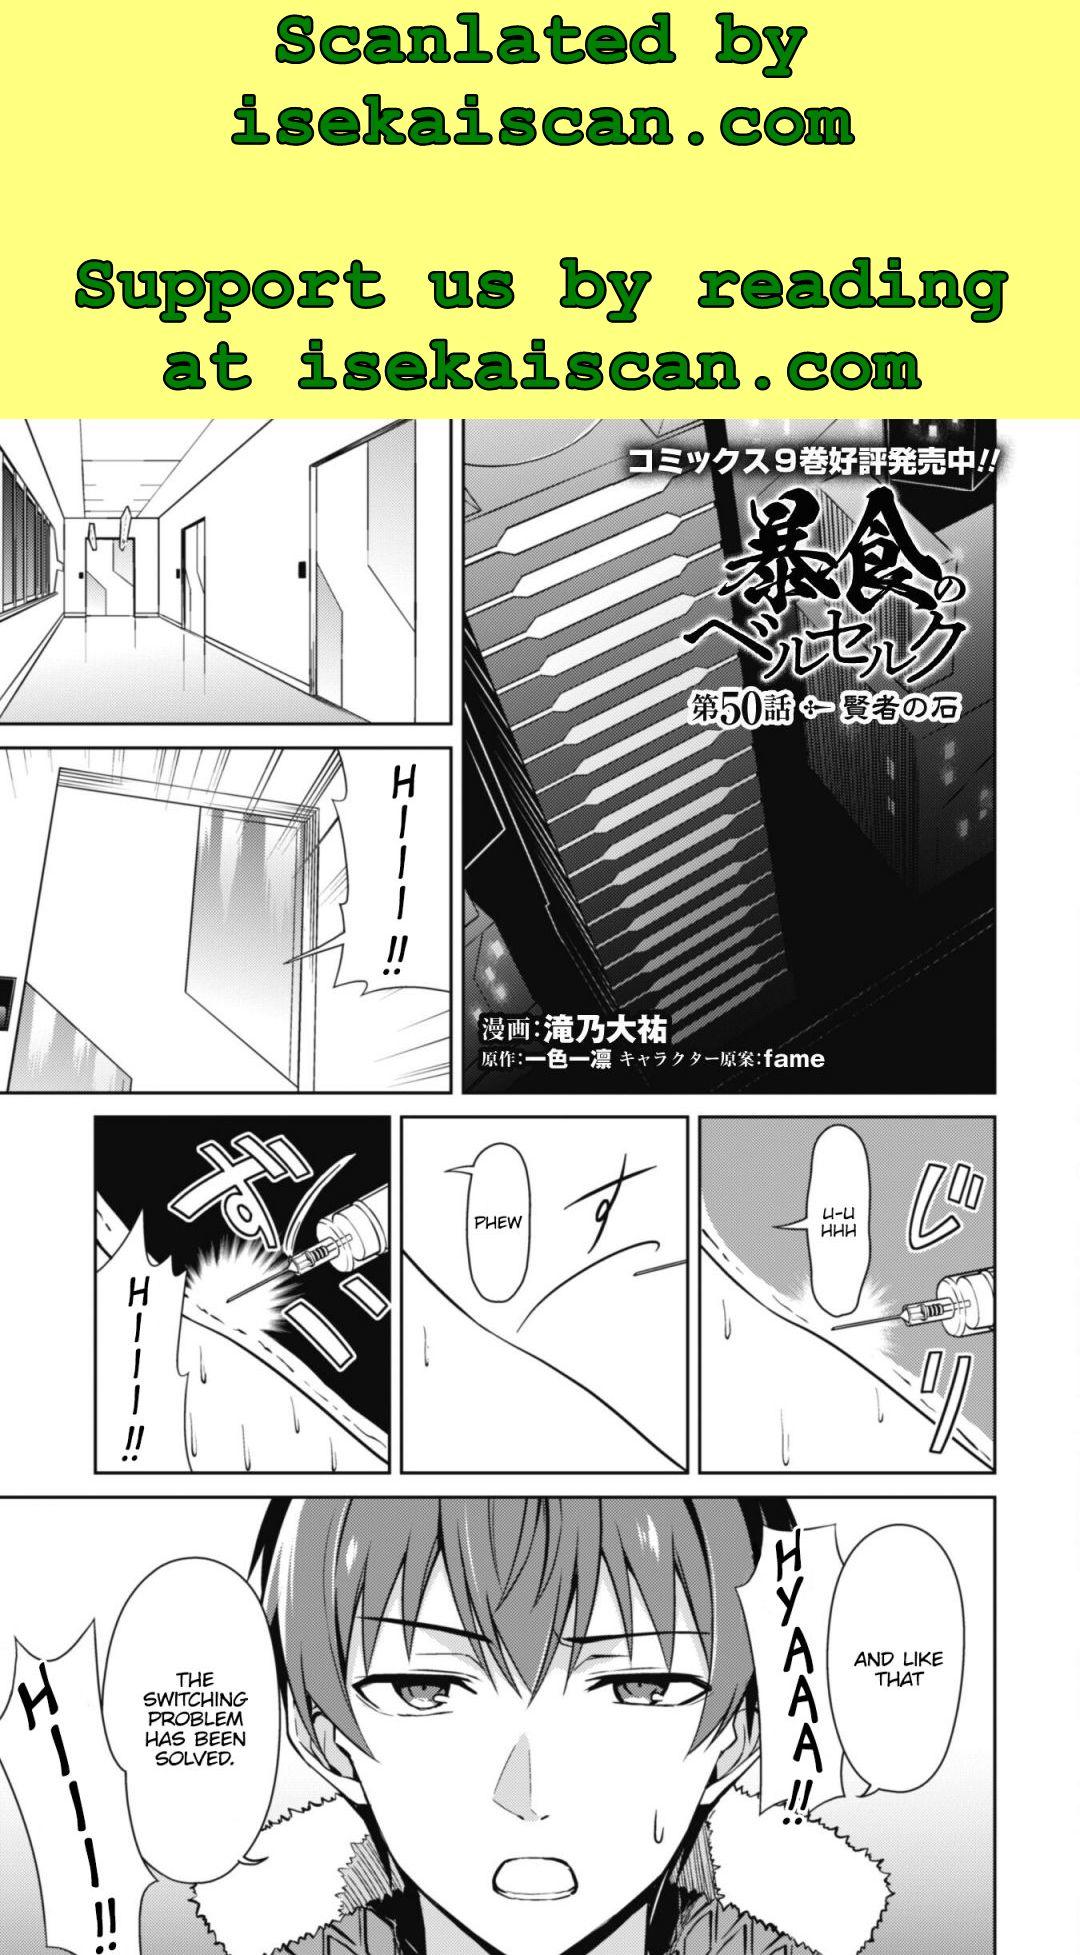 Classroom of the Elite, Chapter 57 - Classroom of the Elite Manga Online